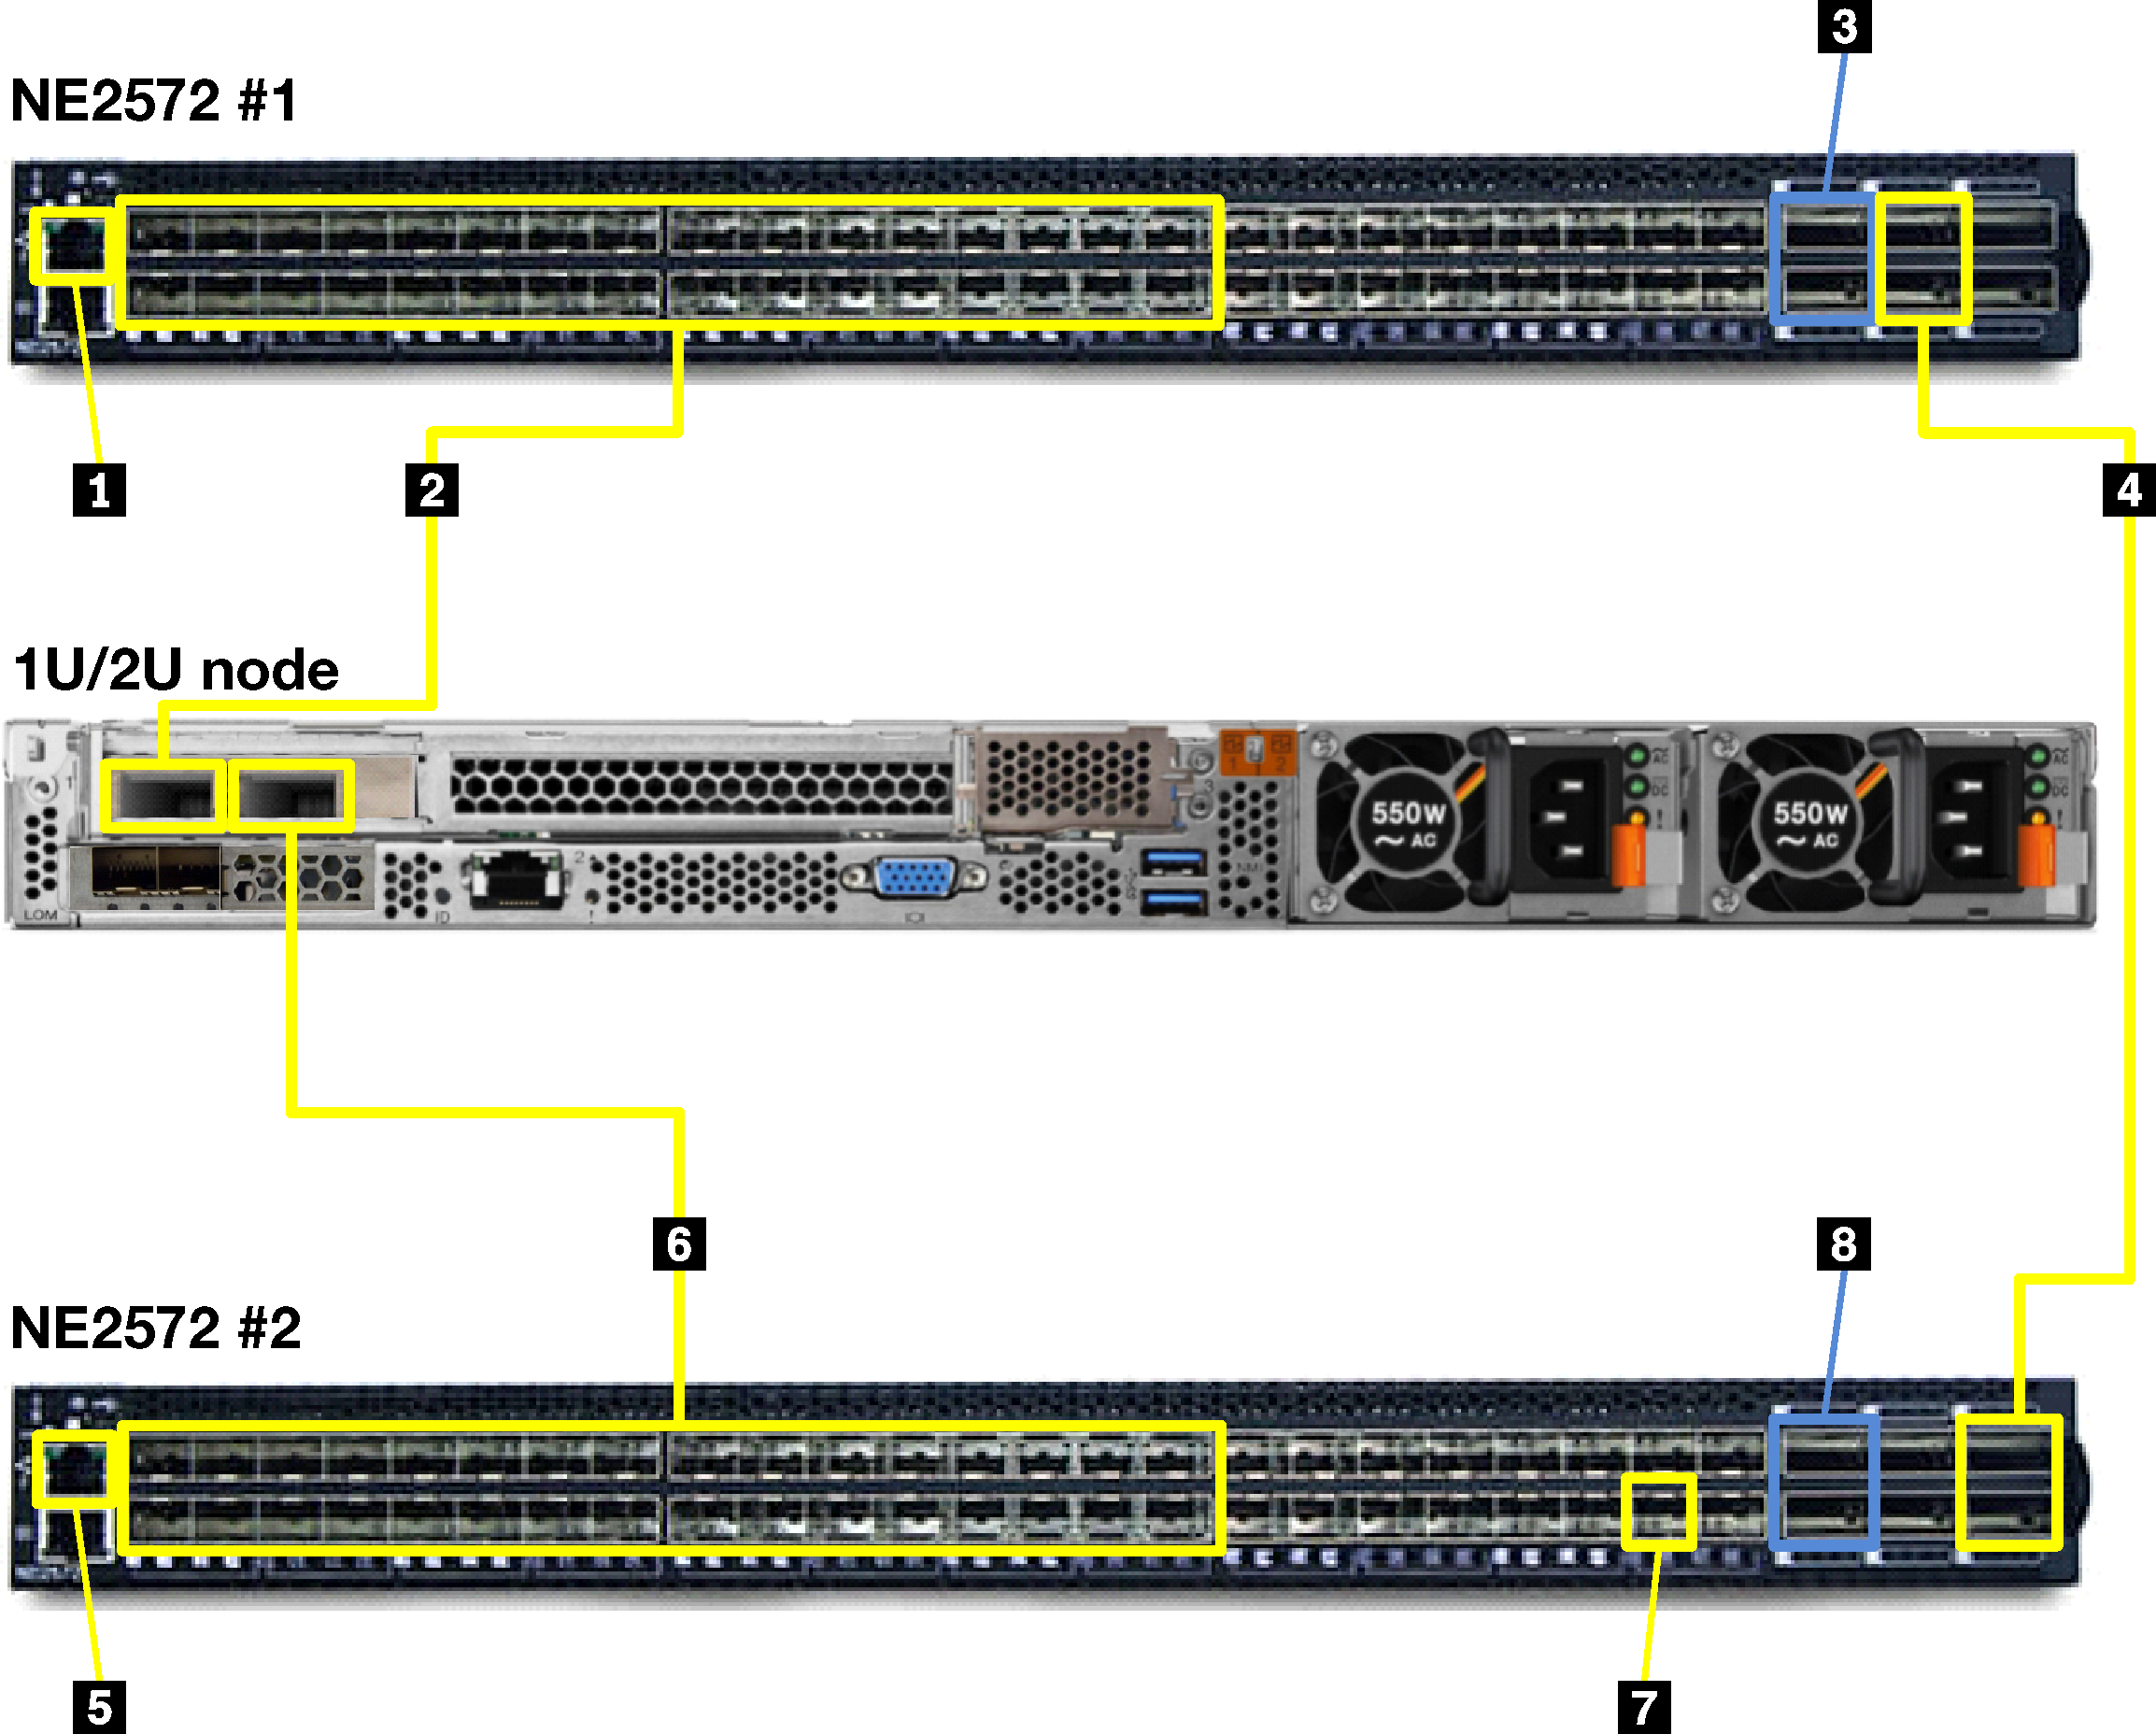 Graphic showing ThinkSystem NE2572 cabling for 1U and 2U appliances.